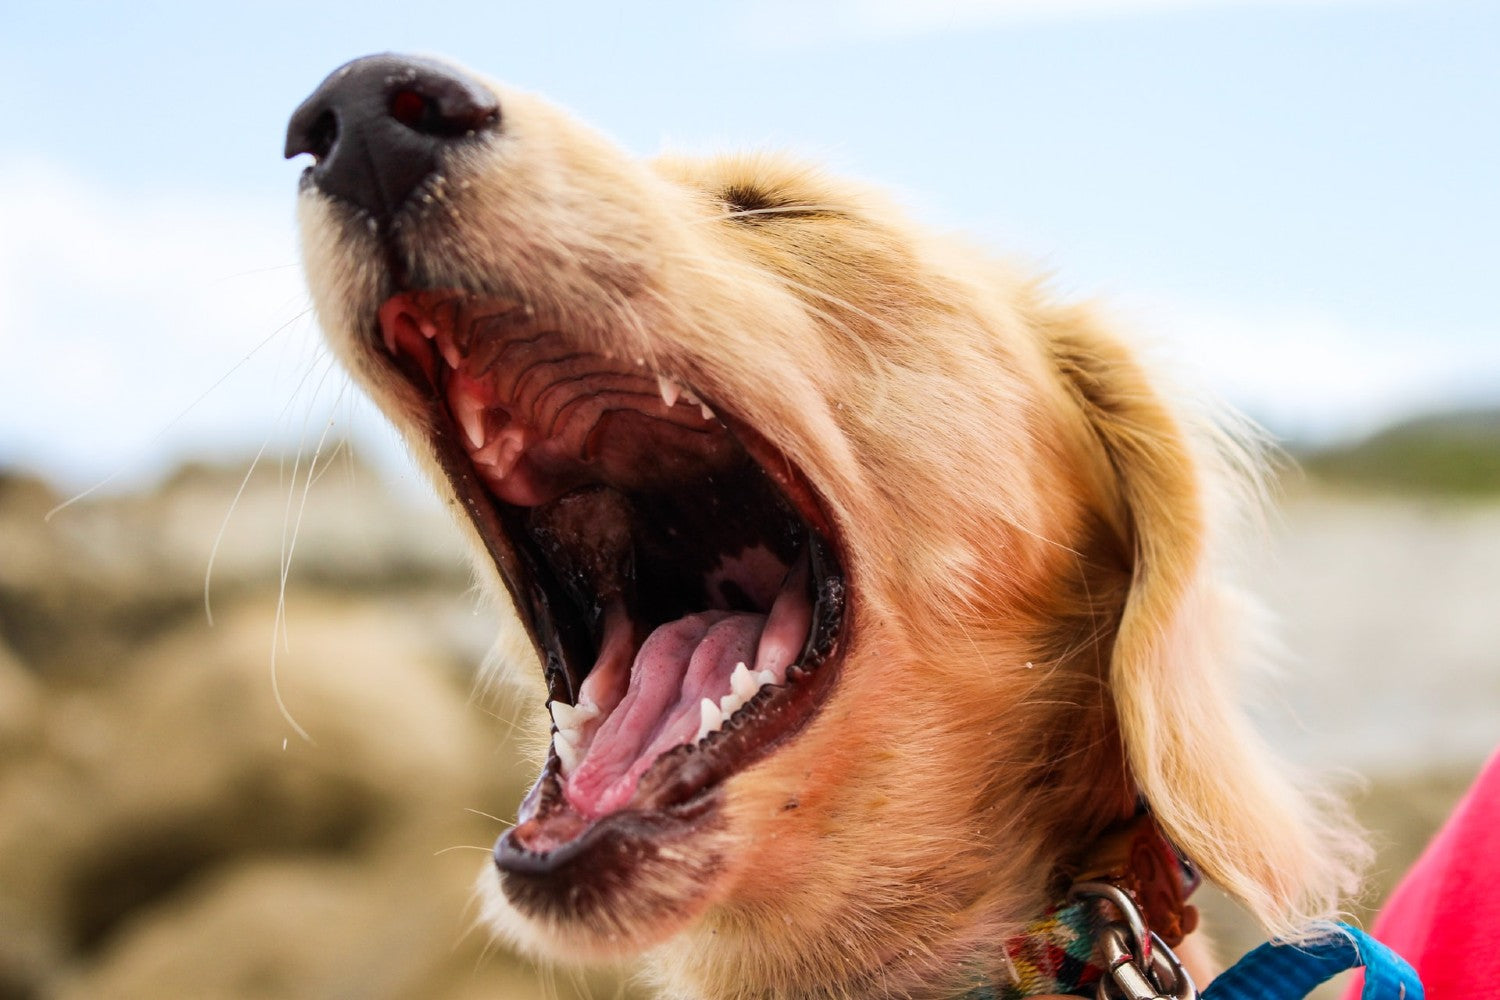 Decoding Dog Barking Sounds - What Does My Dog's Barking Say?